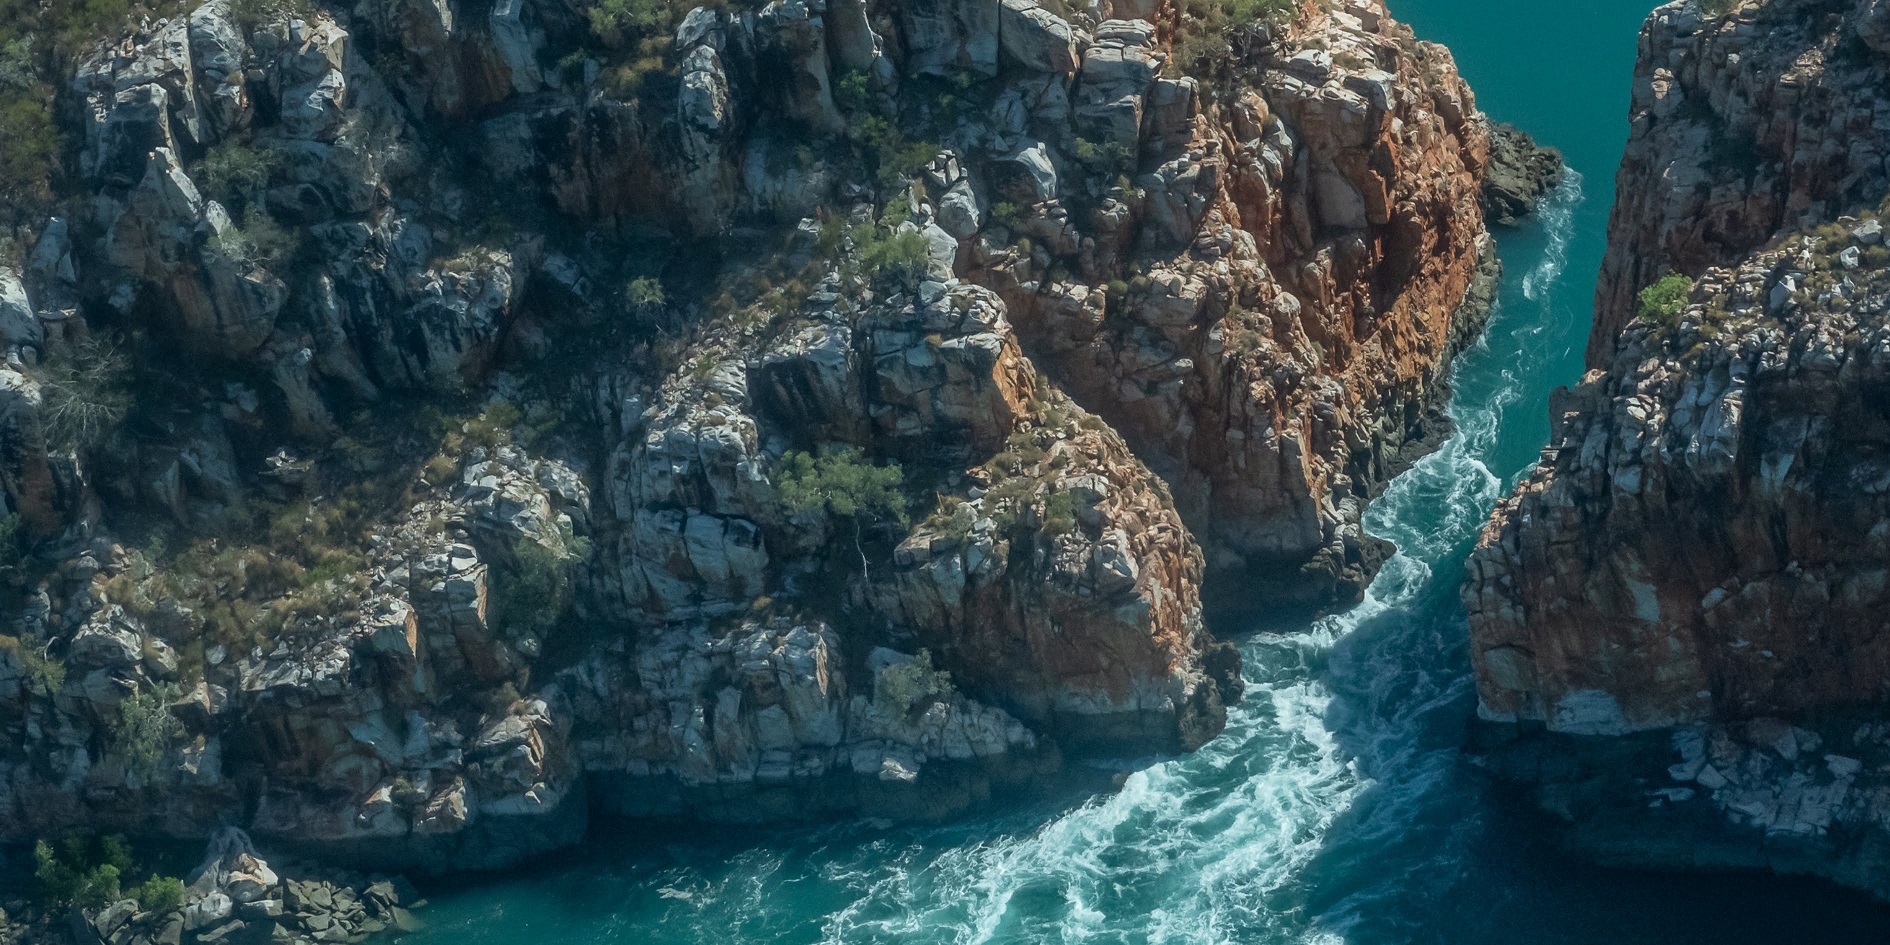 Horizontal Falls - Image by Tobie Oosthuizen Getty Images